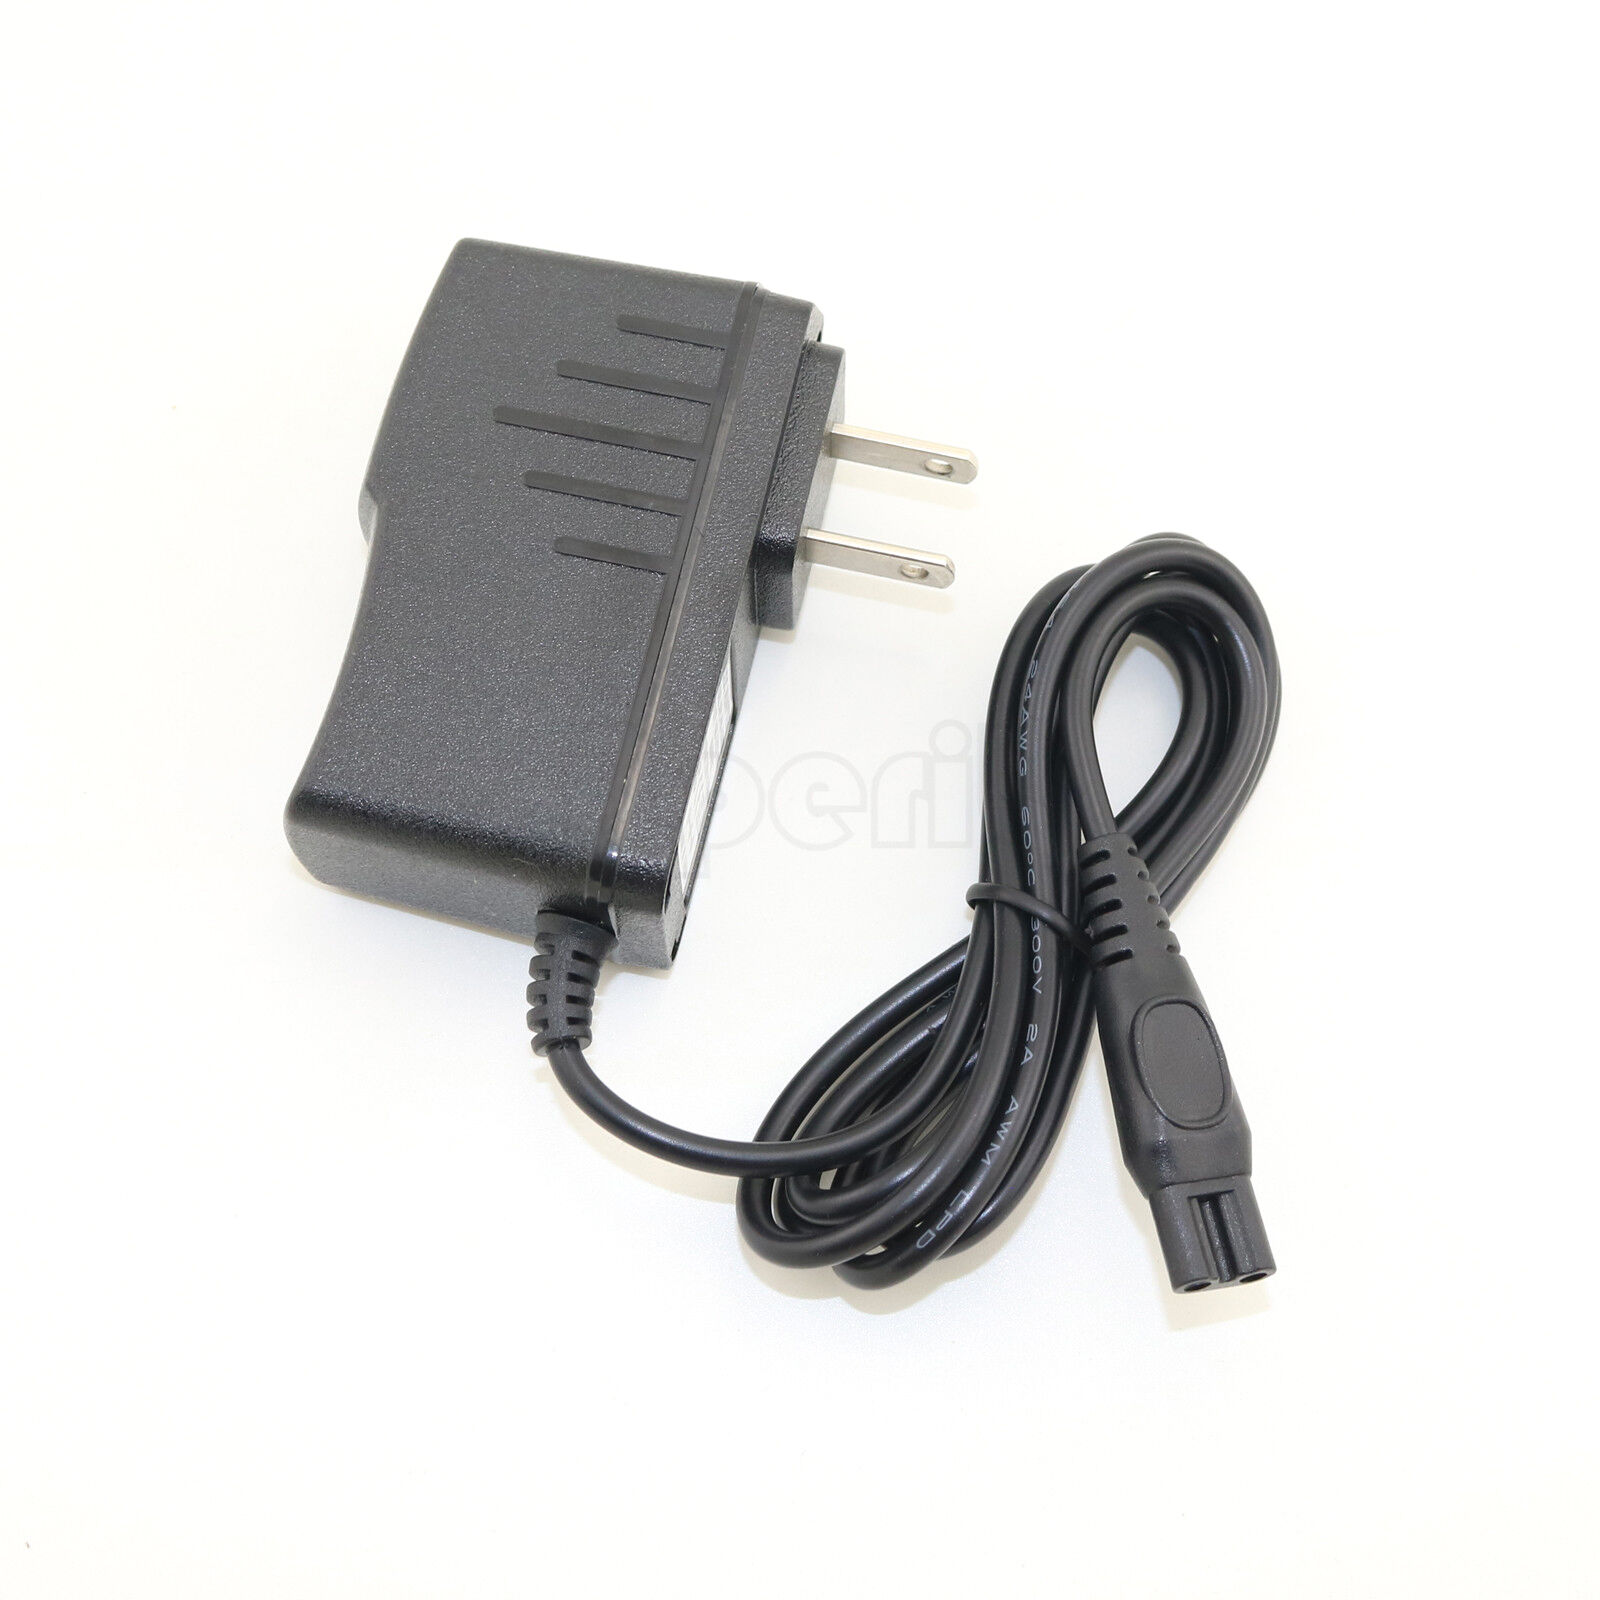 AC/DC Power Adapter Charger For Philips Norelco Multigroom Series 3100 QG3330 AC/DC Power Adapter Charger For Philips N